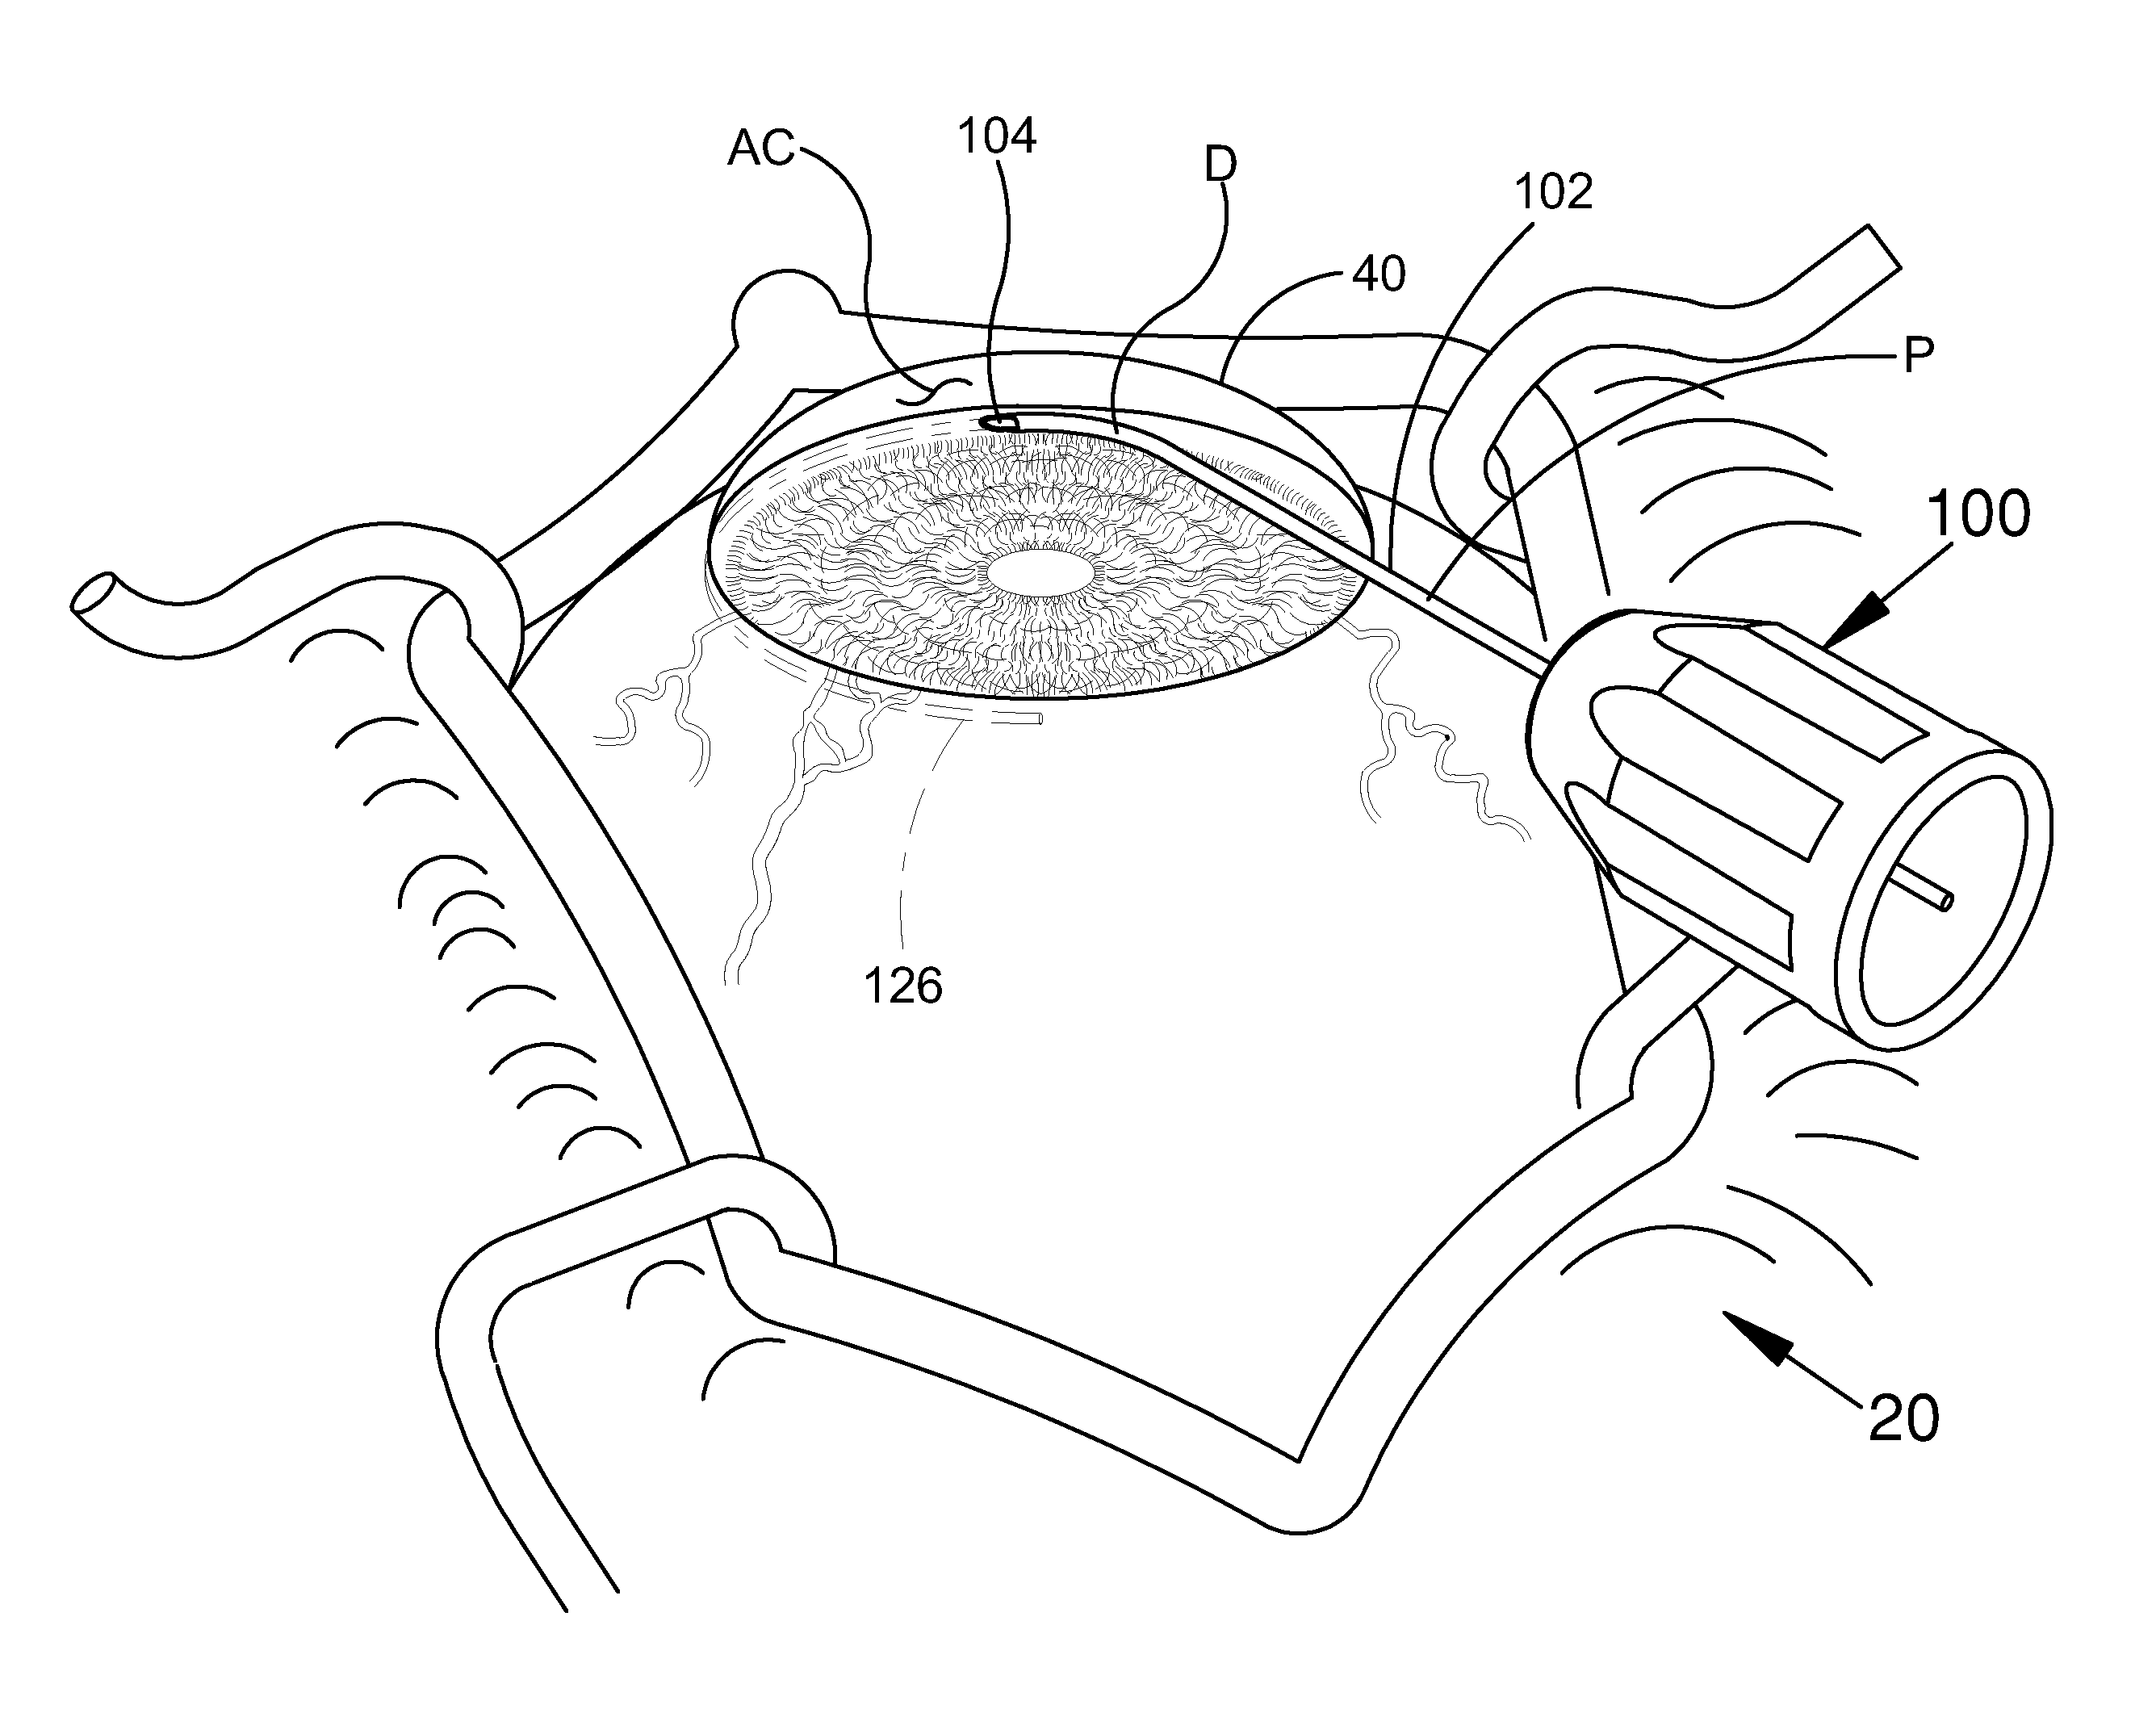 Ocular Implant System and Method